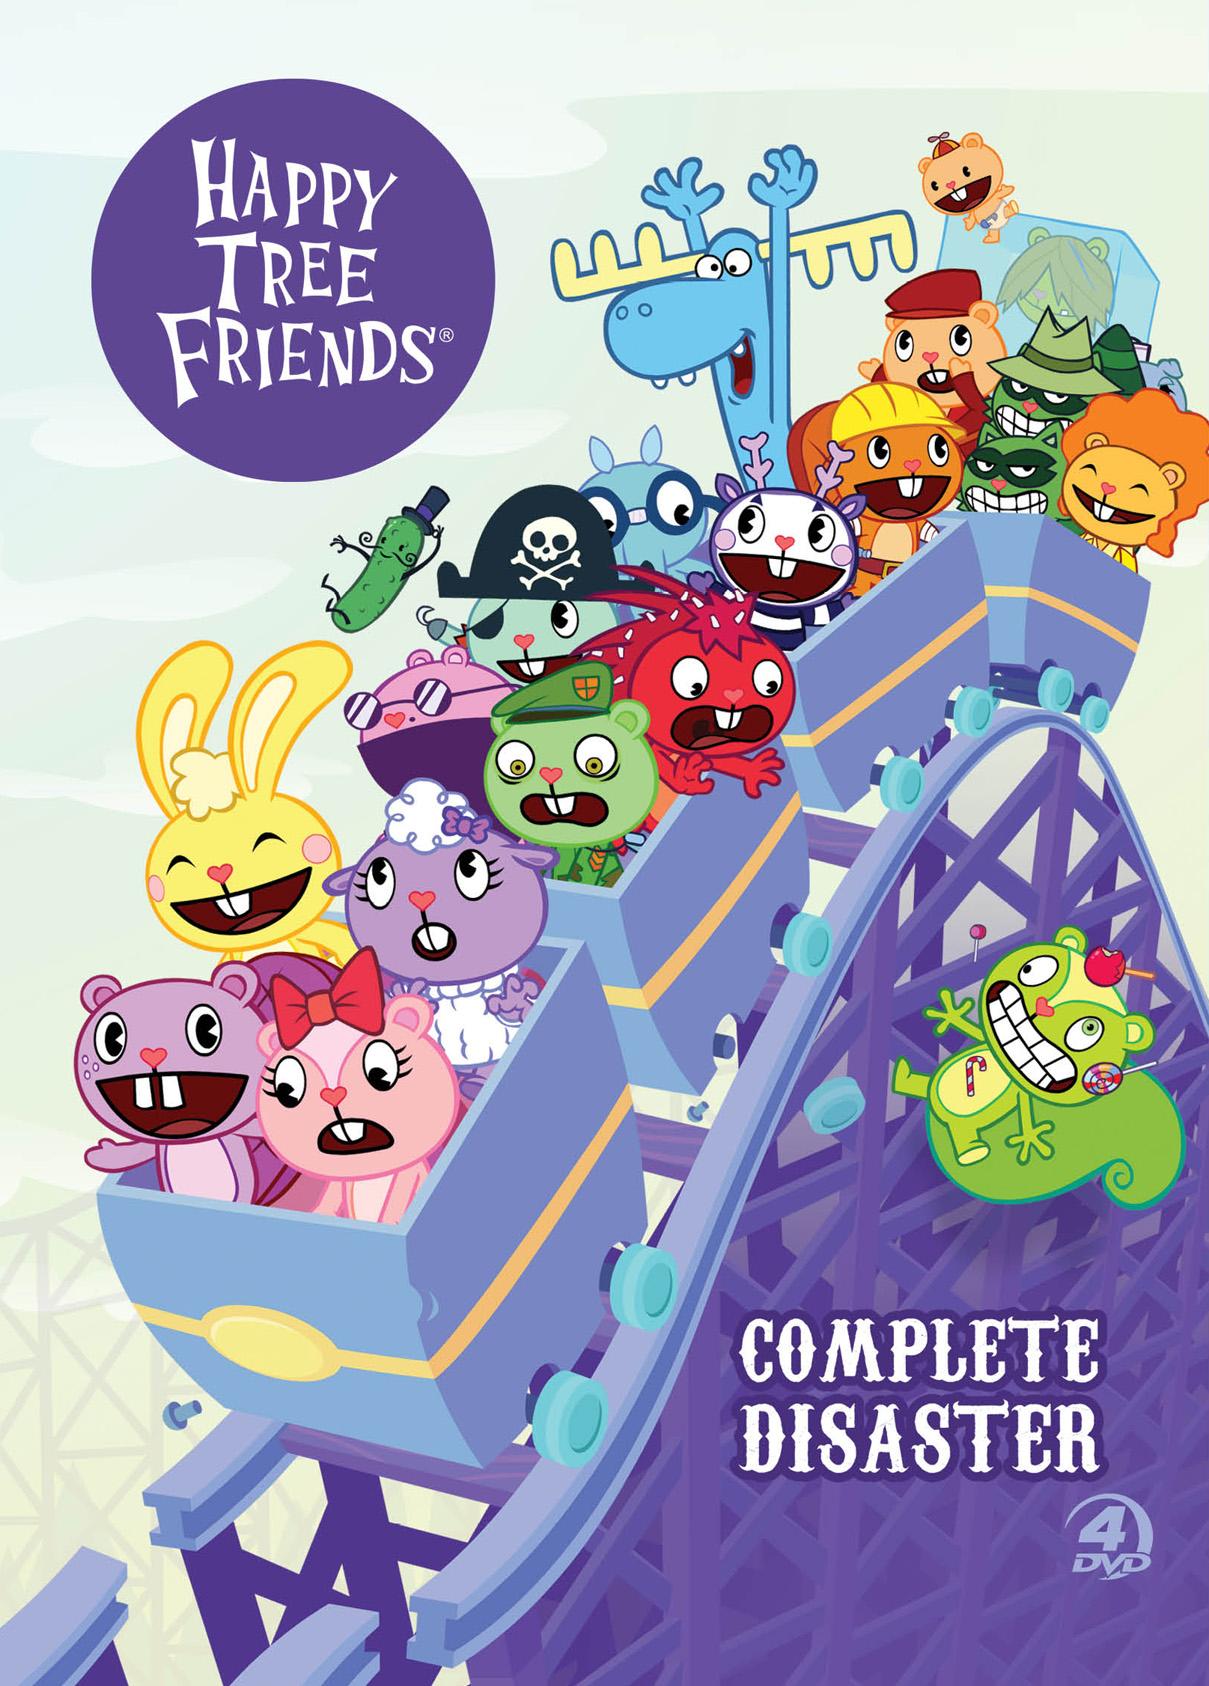 Happy Tree Friends: Complete Disaster Film Company